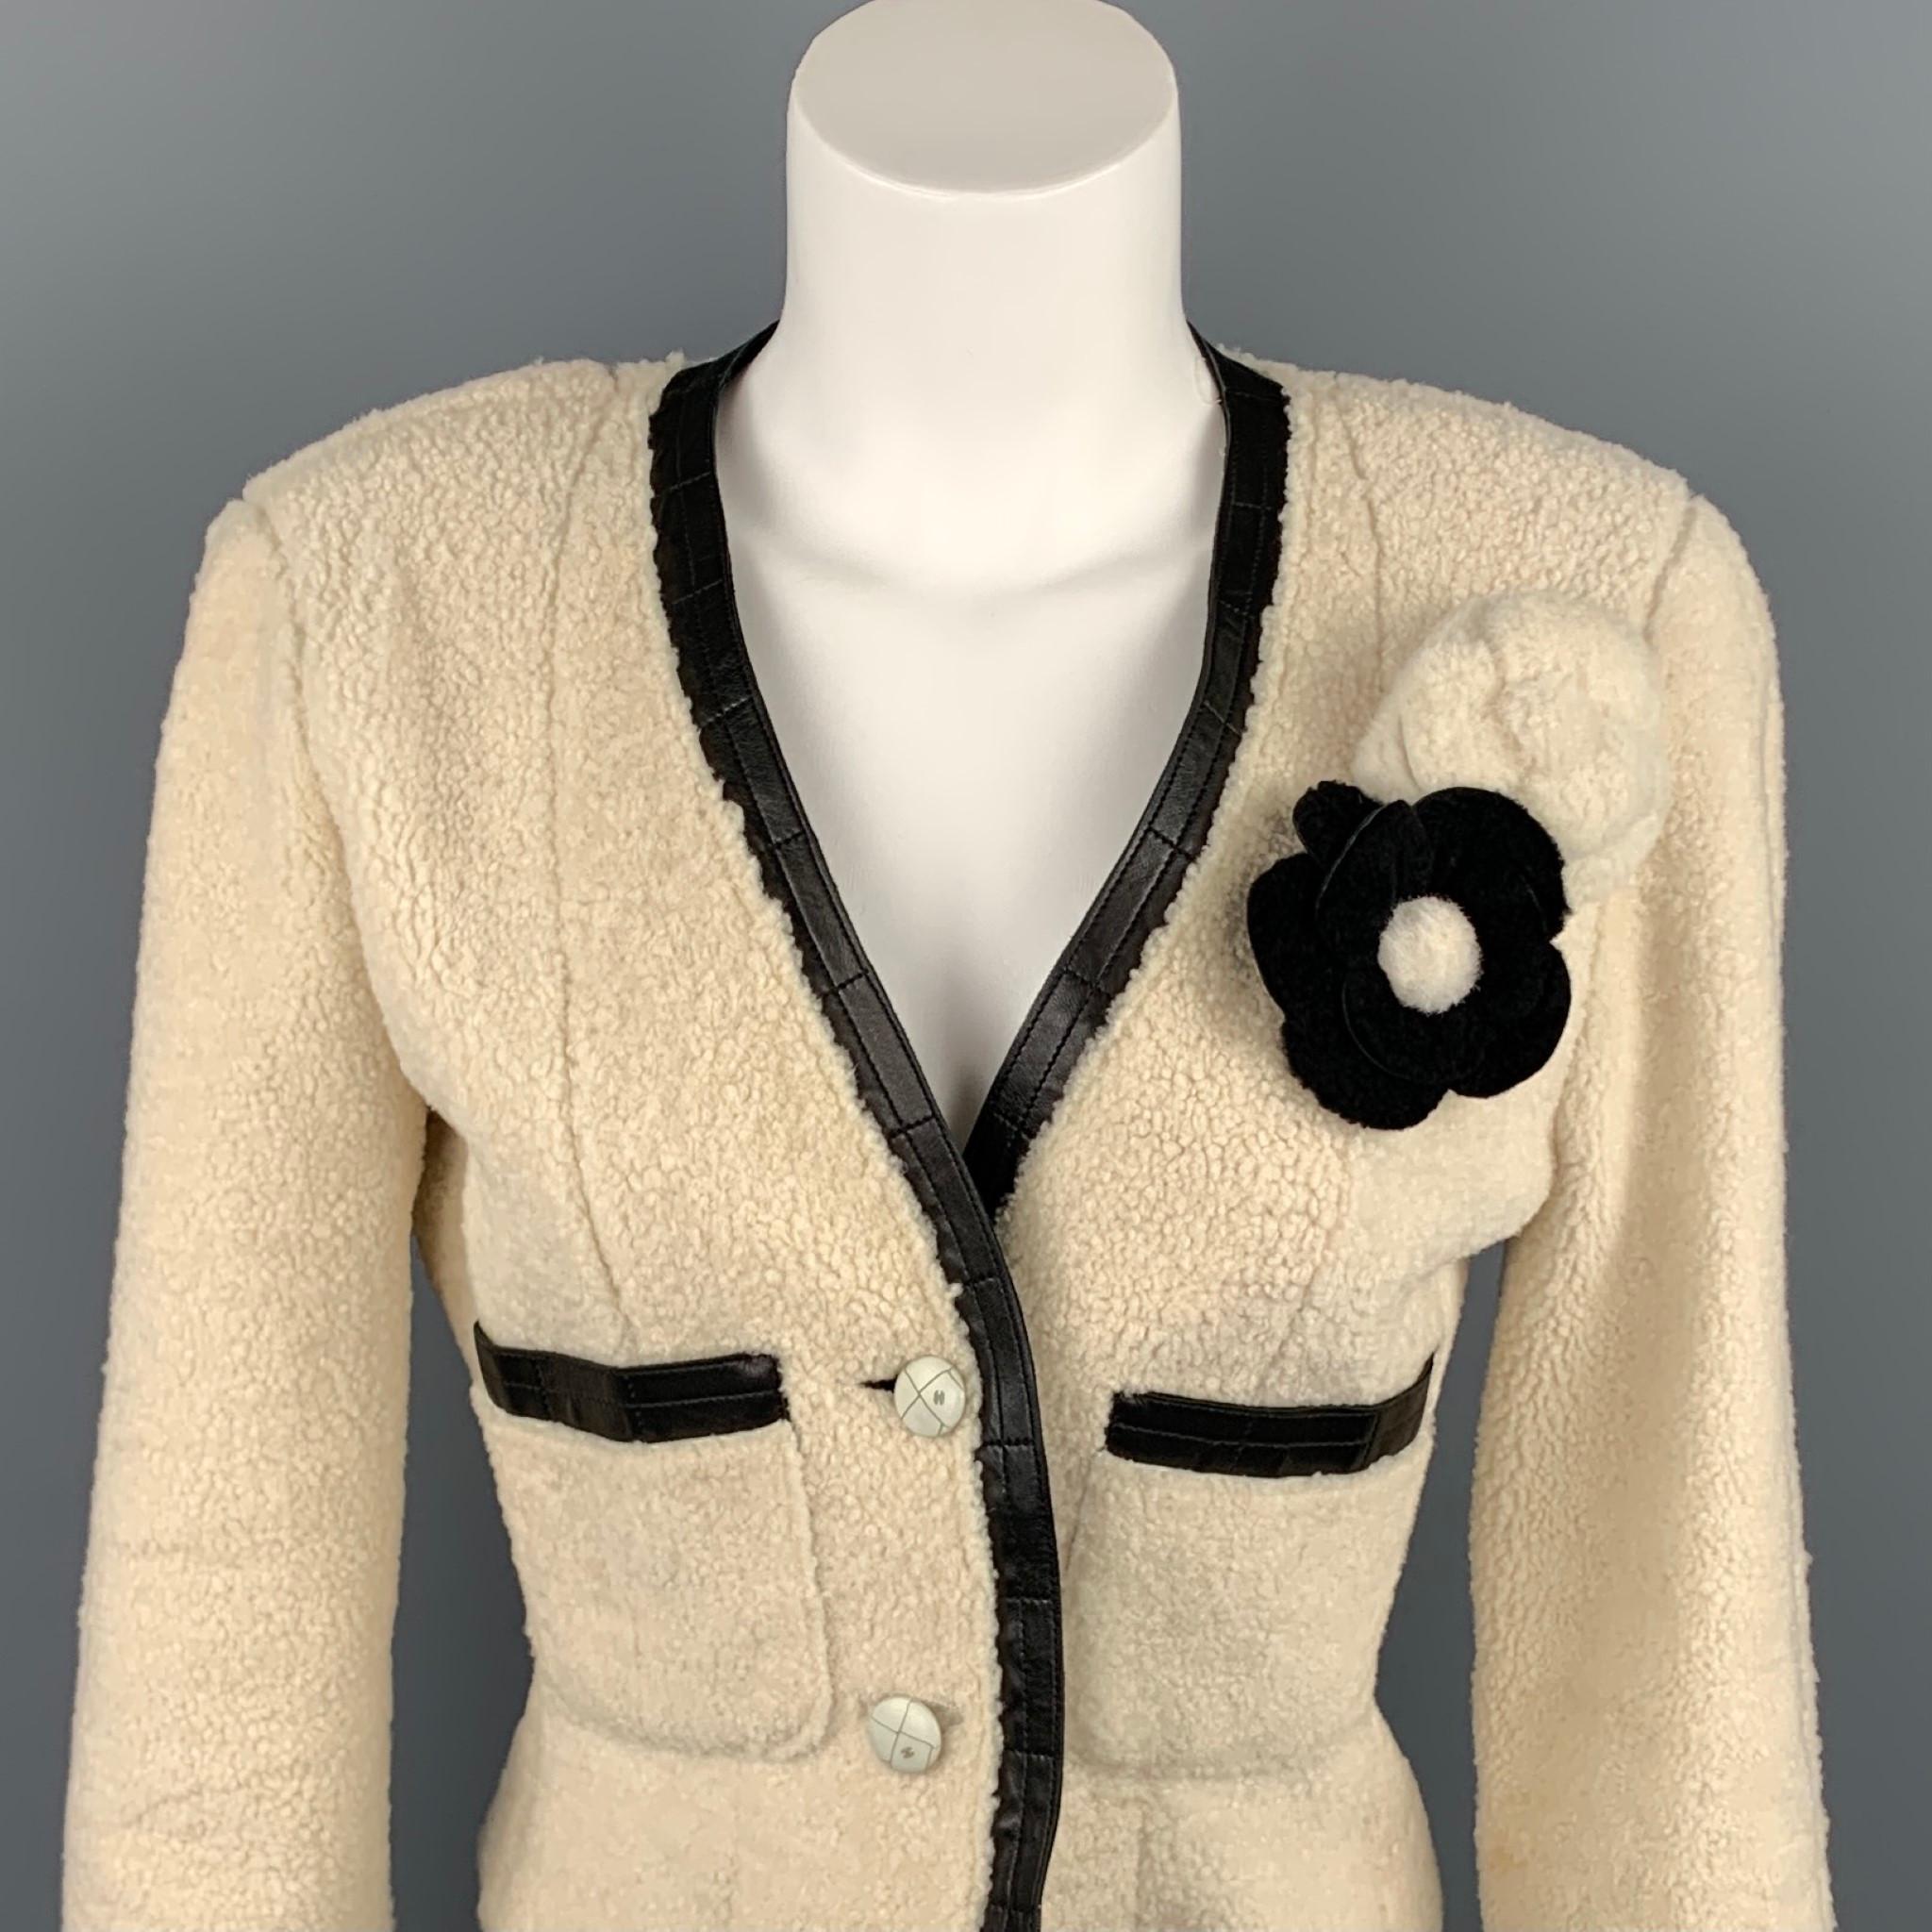 CHANEL 2003 jacket comes in a cream shearling with a black leather trim featuring two camelia pins, front pockets, and a two button closure. Made in France.

Very Good Pre-Owned Condition.
Marked: FR 38

Measurements:

Shoulder: 16.5 in.
Bust: 34